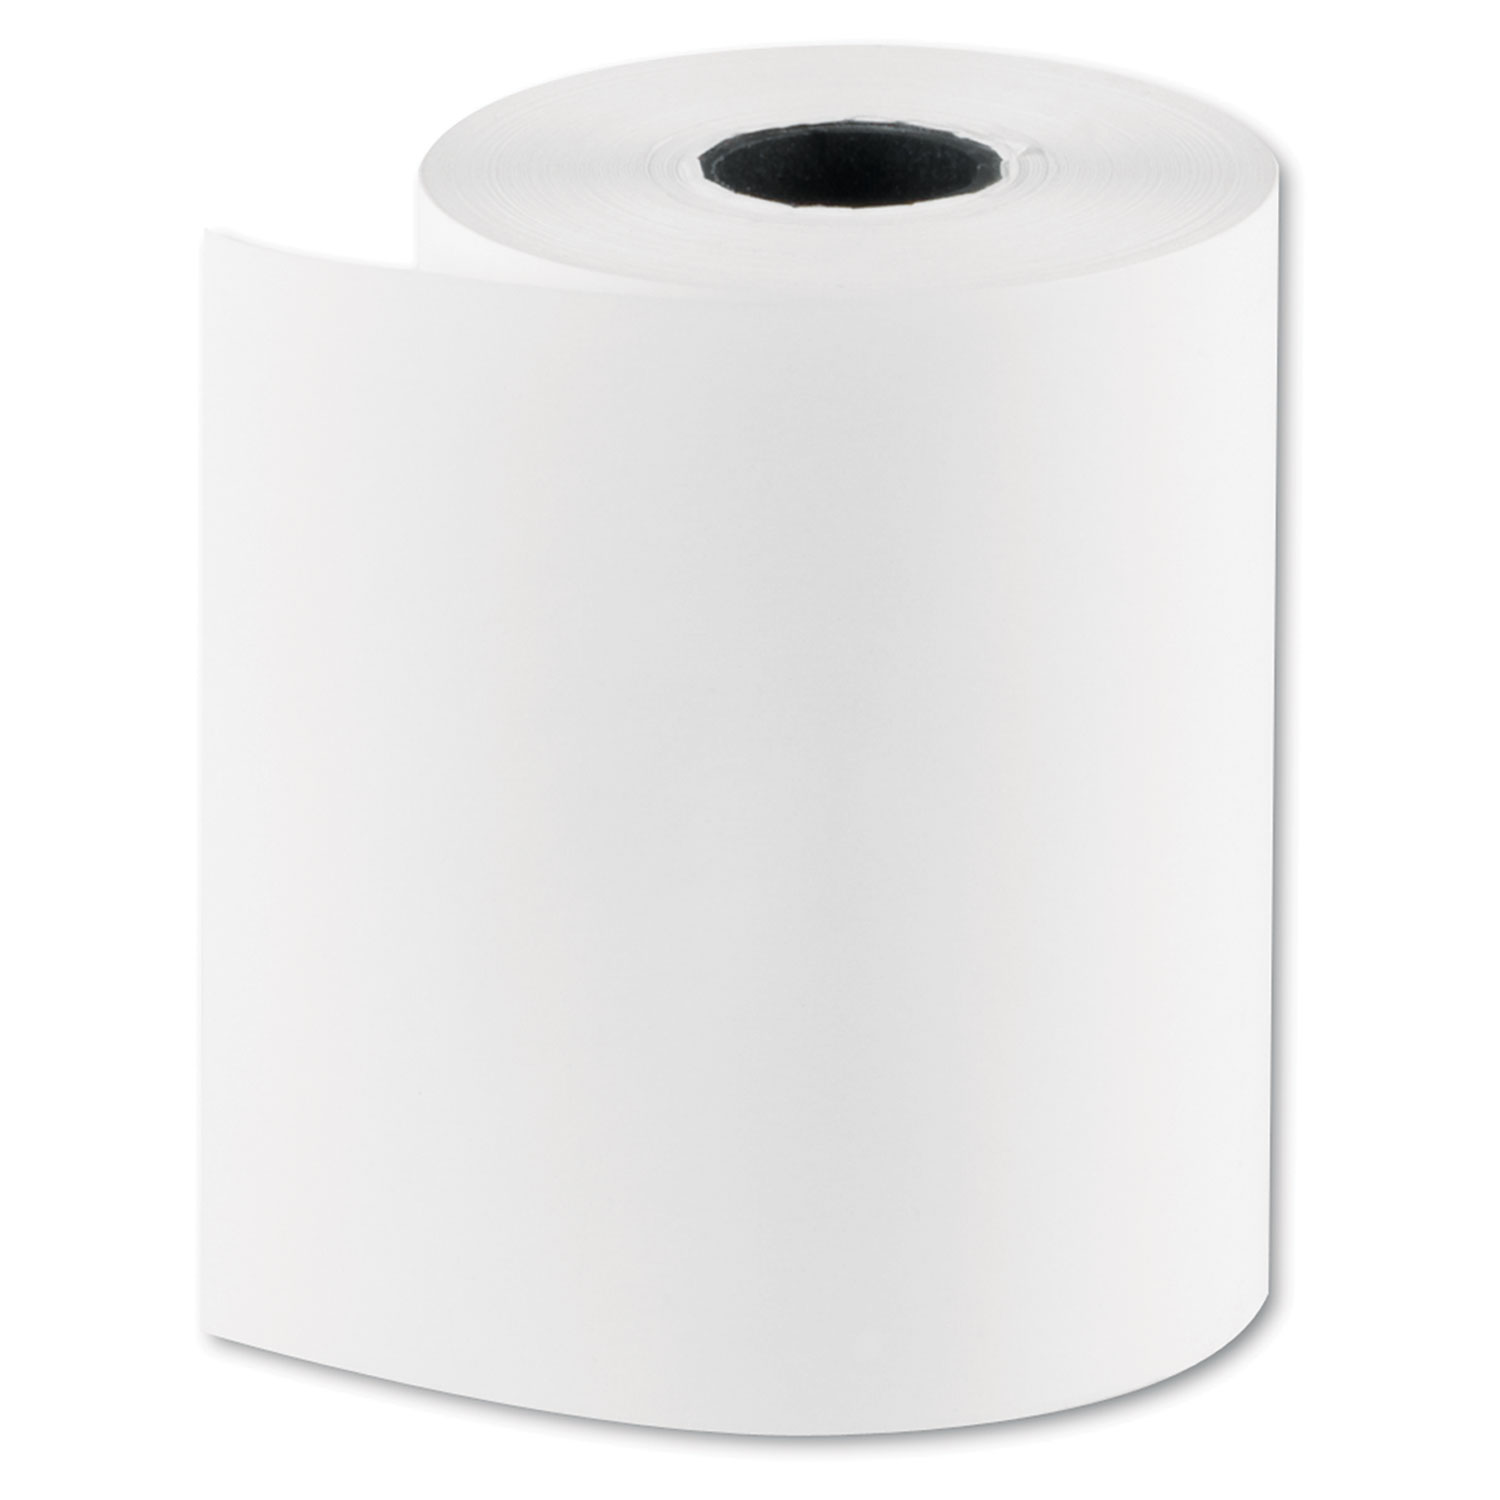  National Checking Company NTC 7225-80SP RegistRolls Thermal Point-of-Sale Rolls, 2.25 x 80 ft, White, 48/Carton (NTC722580SP) 